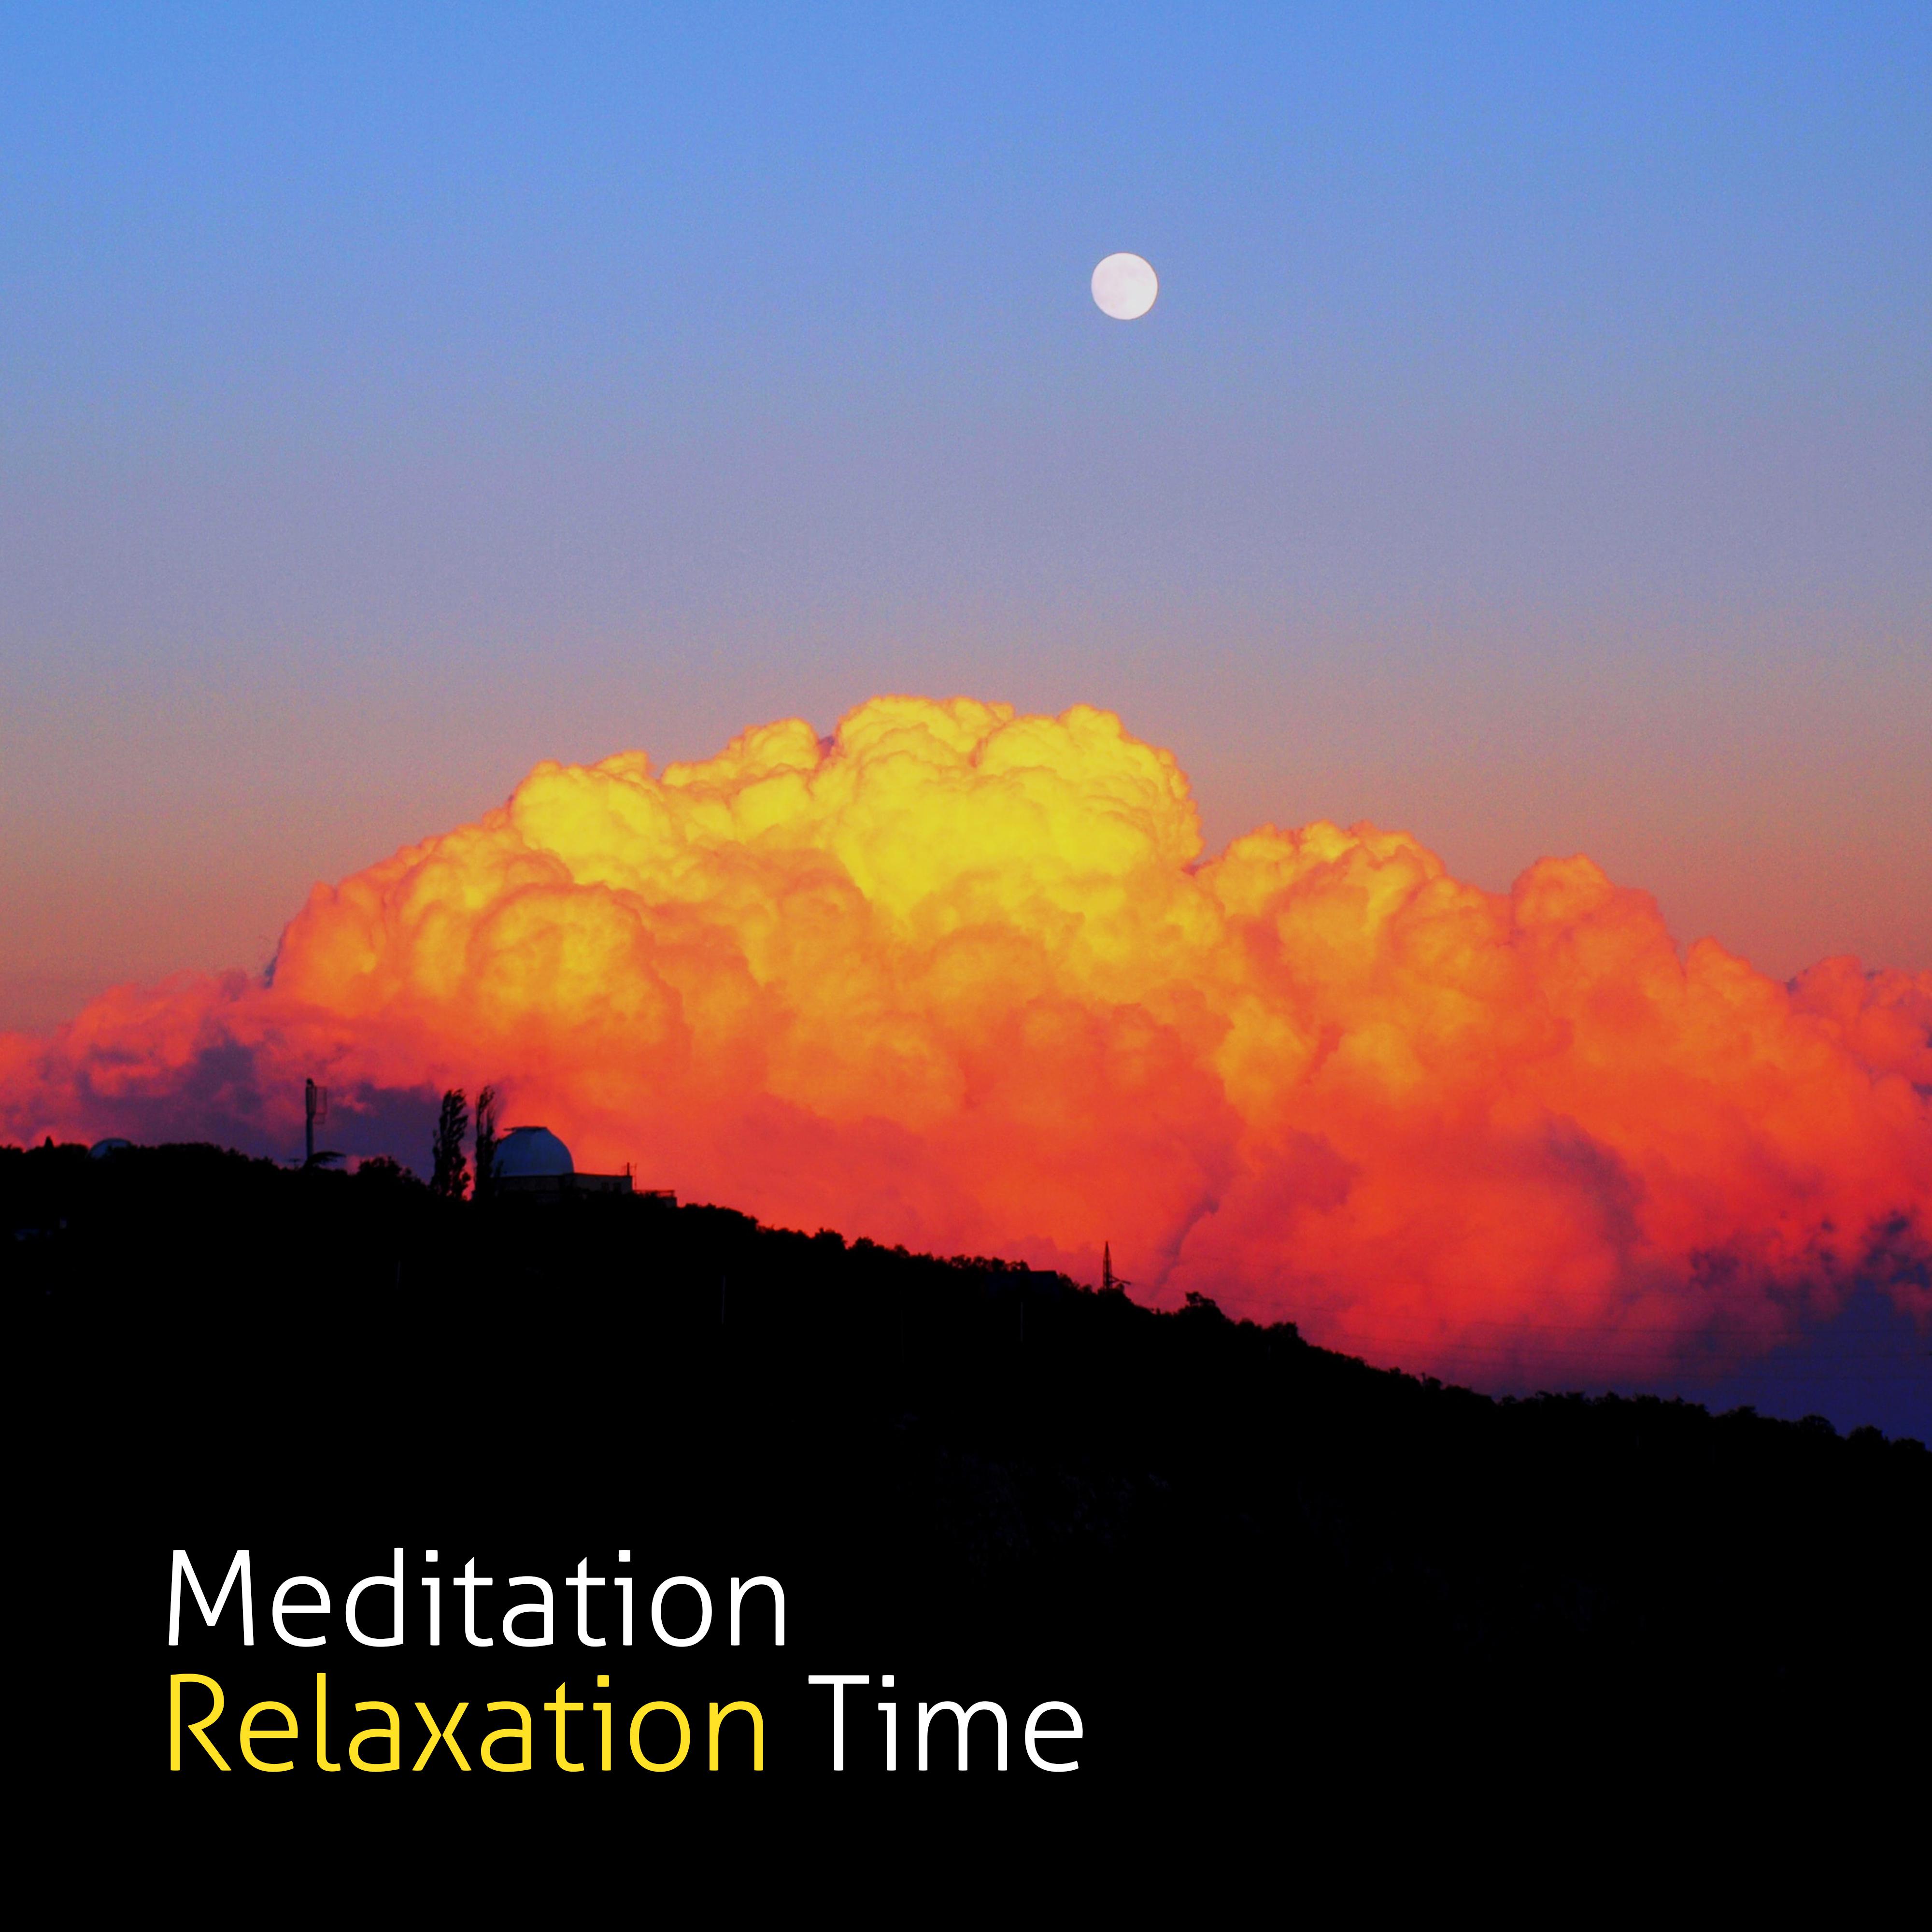 Meditation Relaxation Time